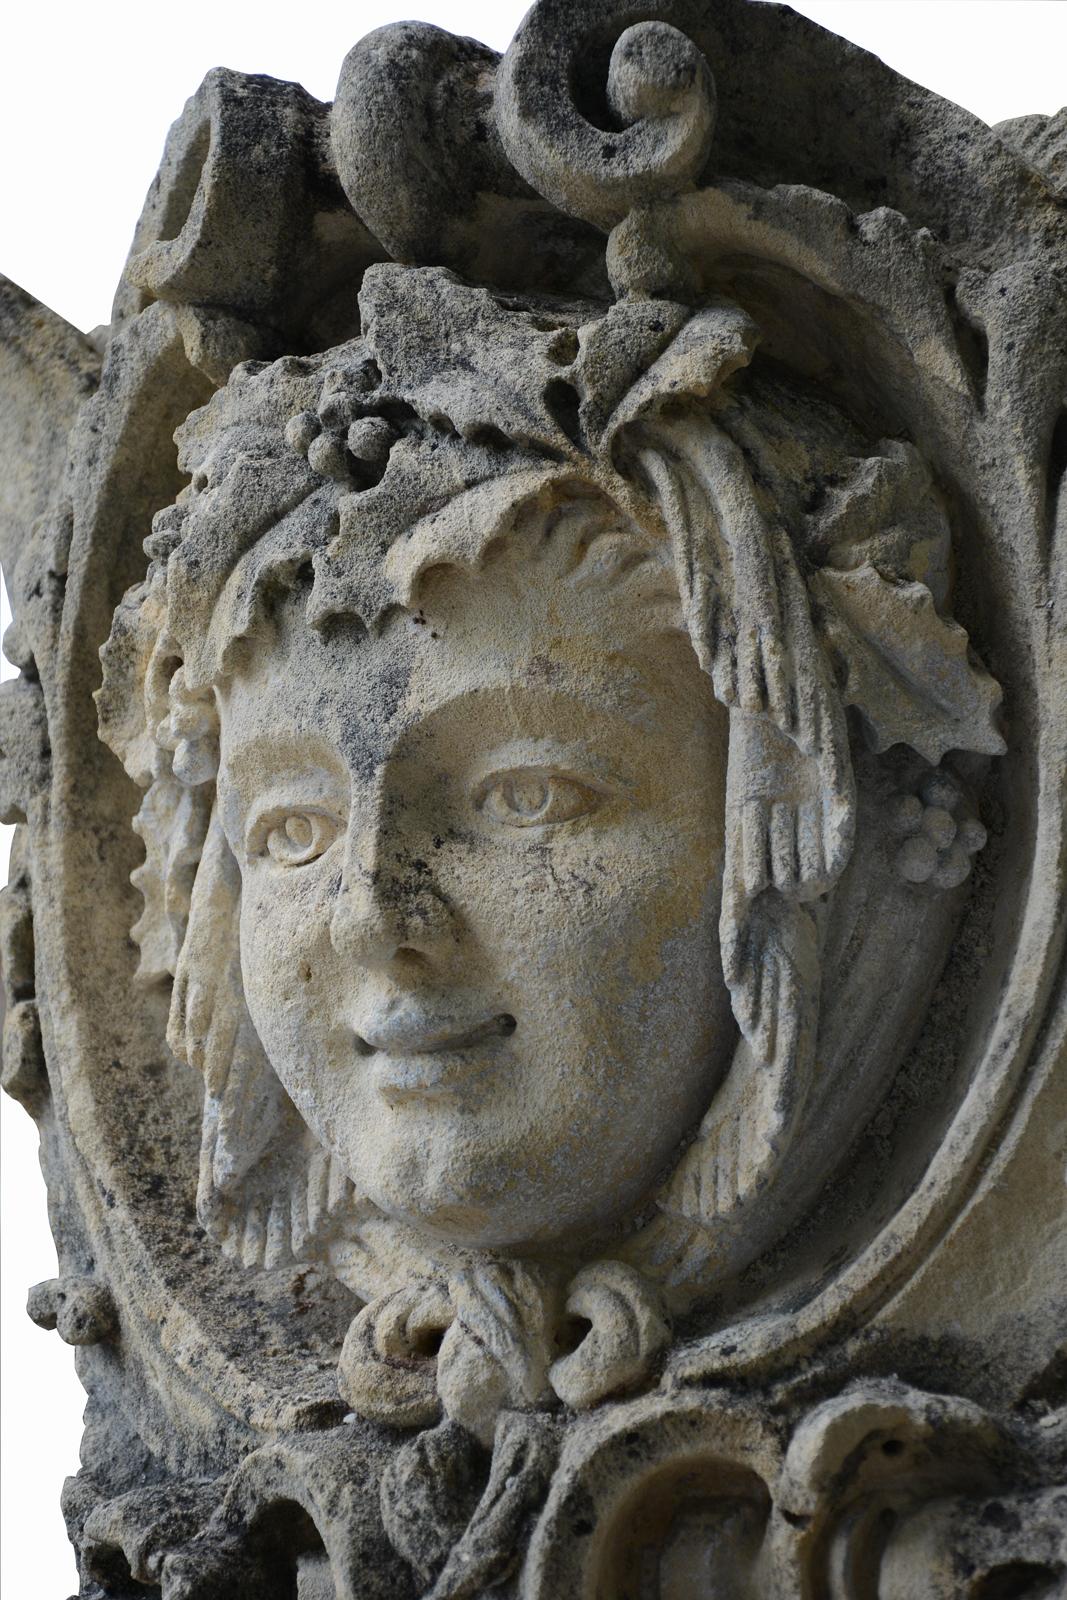 Dating from the 19th century, stone mascaron representing a woman. Its head is in a medallion formed of scrollwork and vegetable interlages. She wears a crown of holly and a scarf around her face and forming a knot in it. The holly is a plant very